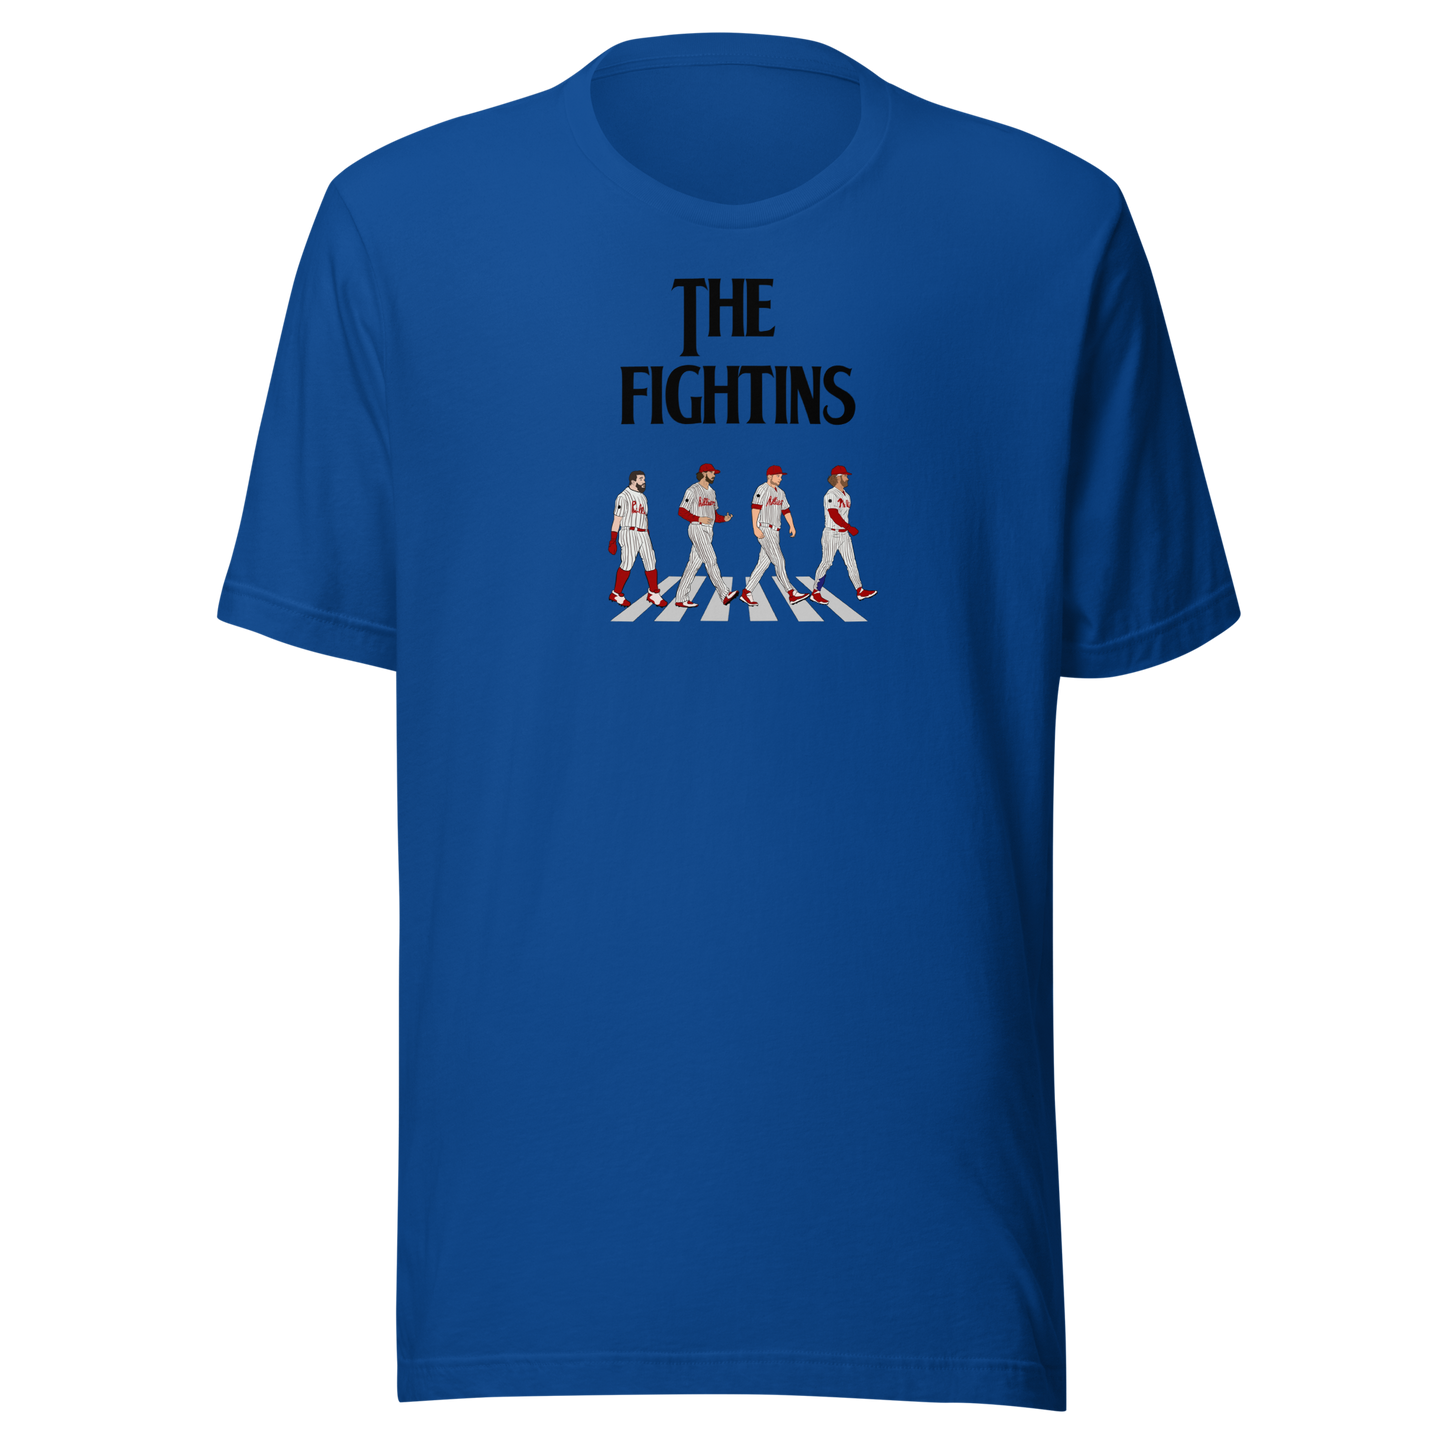 "The Fightins" Abbey Road T-Shirt